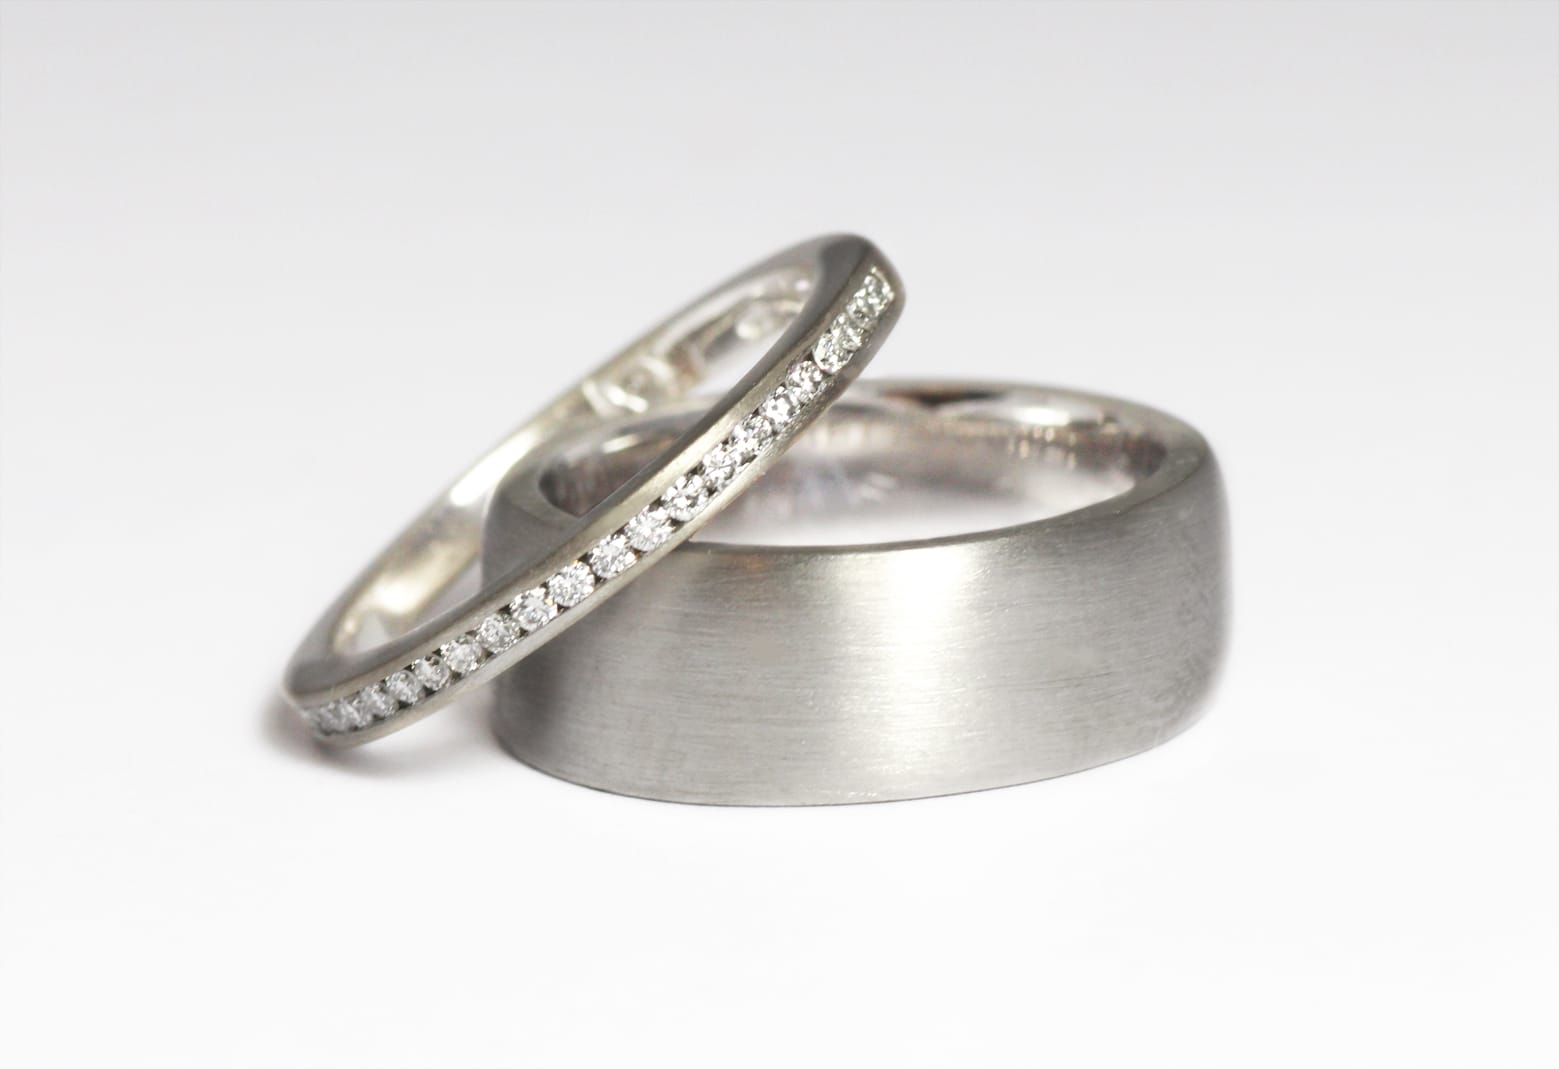 18ct Fairtrade white gold brushed finish